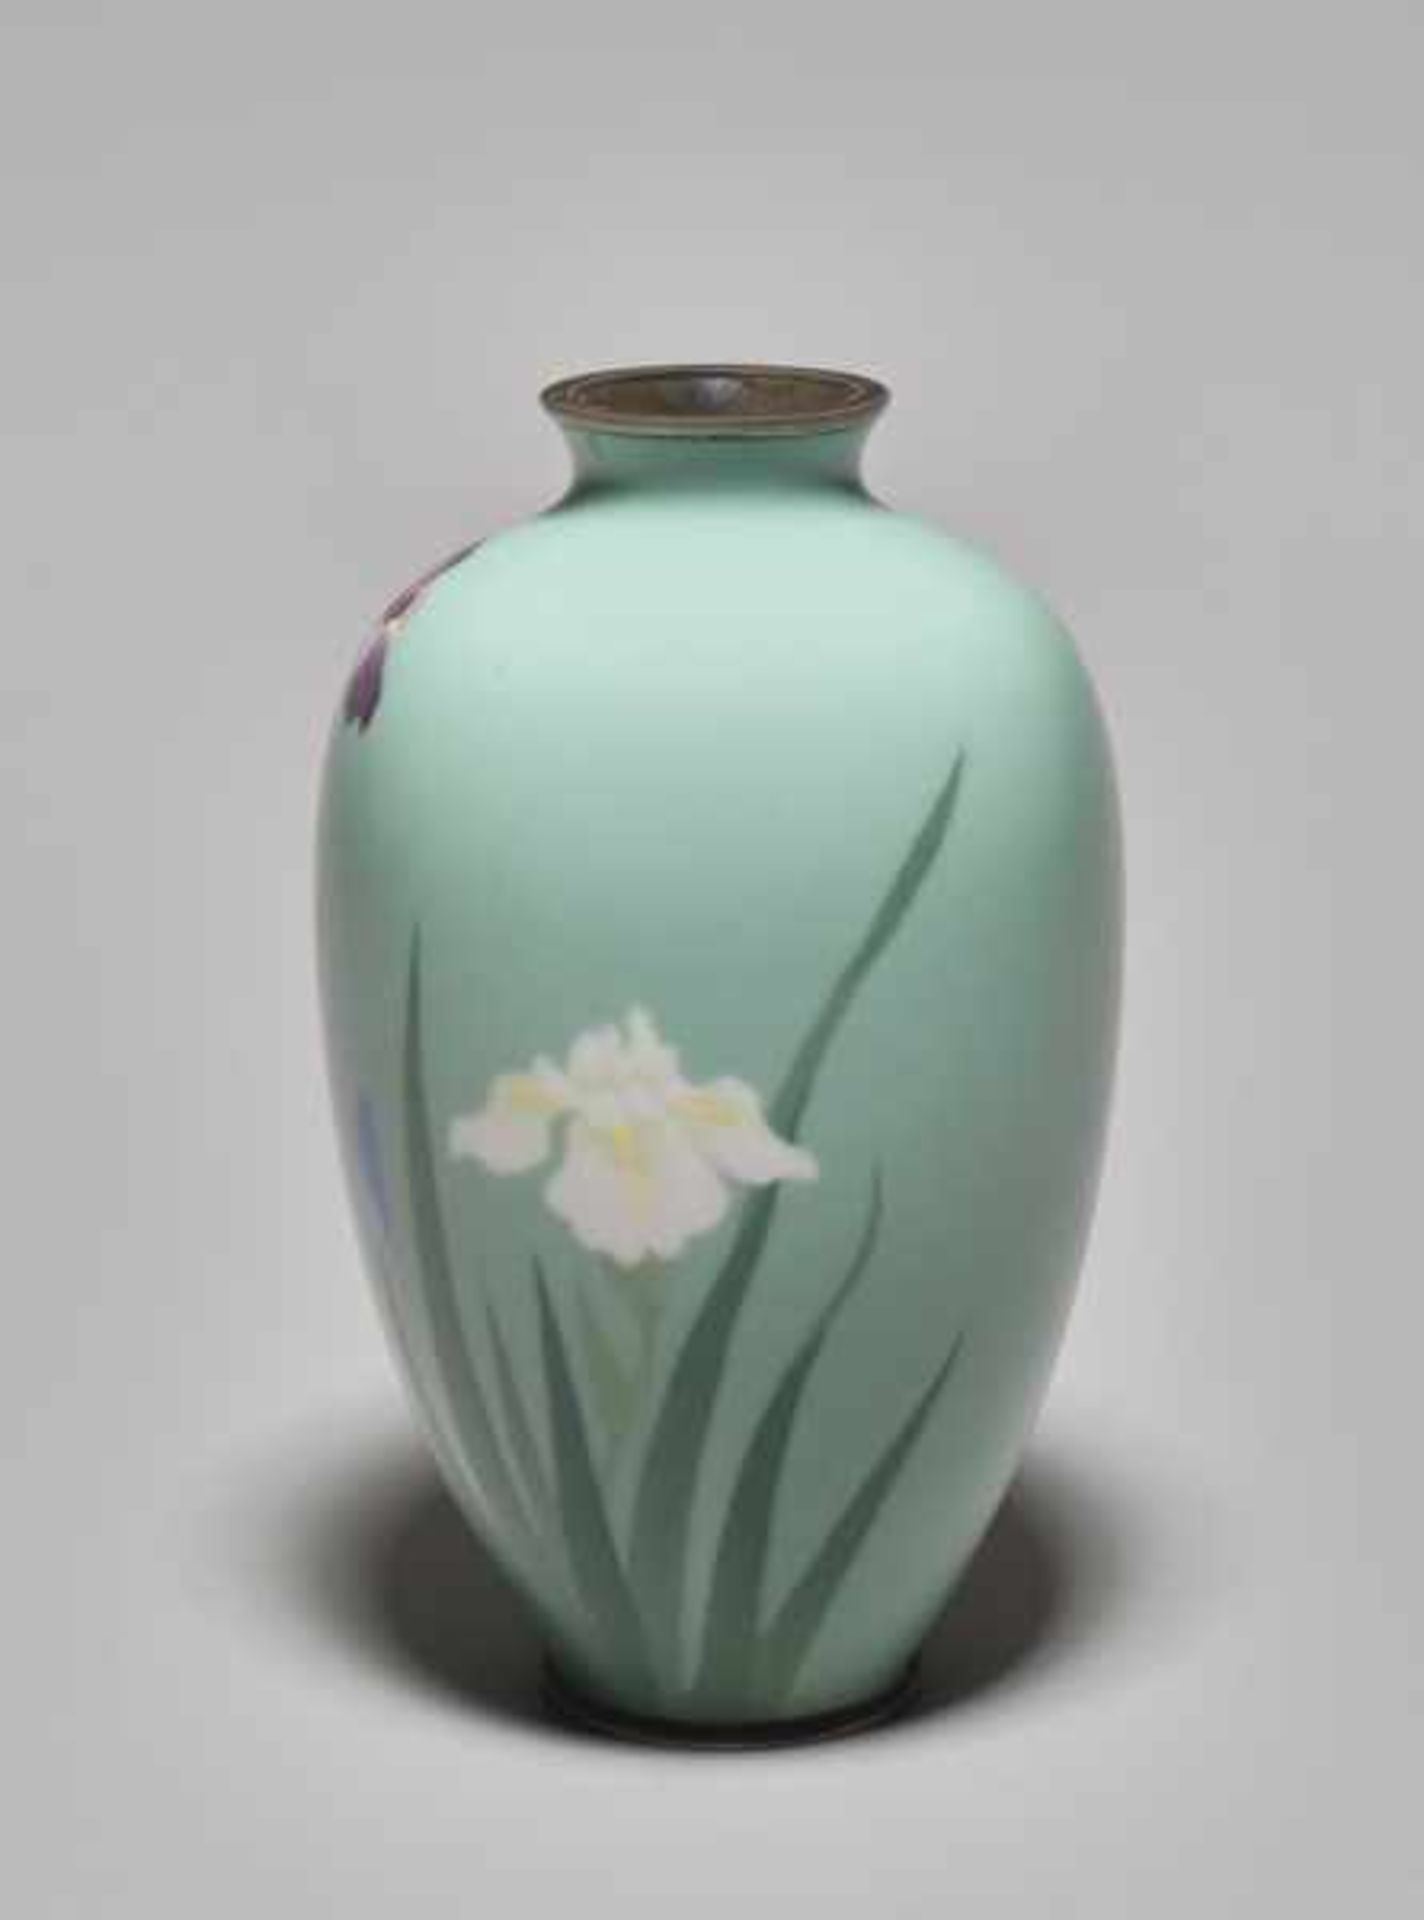 A CLOISONNÉ VASE WITH IRIS BLOSSOMS IN THE STYLE OF NAMIKAWA SOSUKE Colored enamel cloisonné on - Image 2 of 6